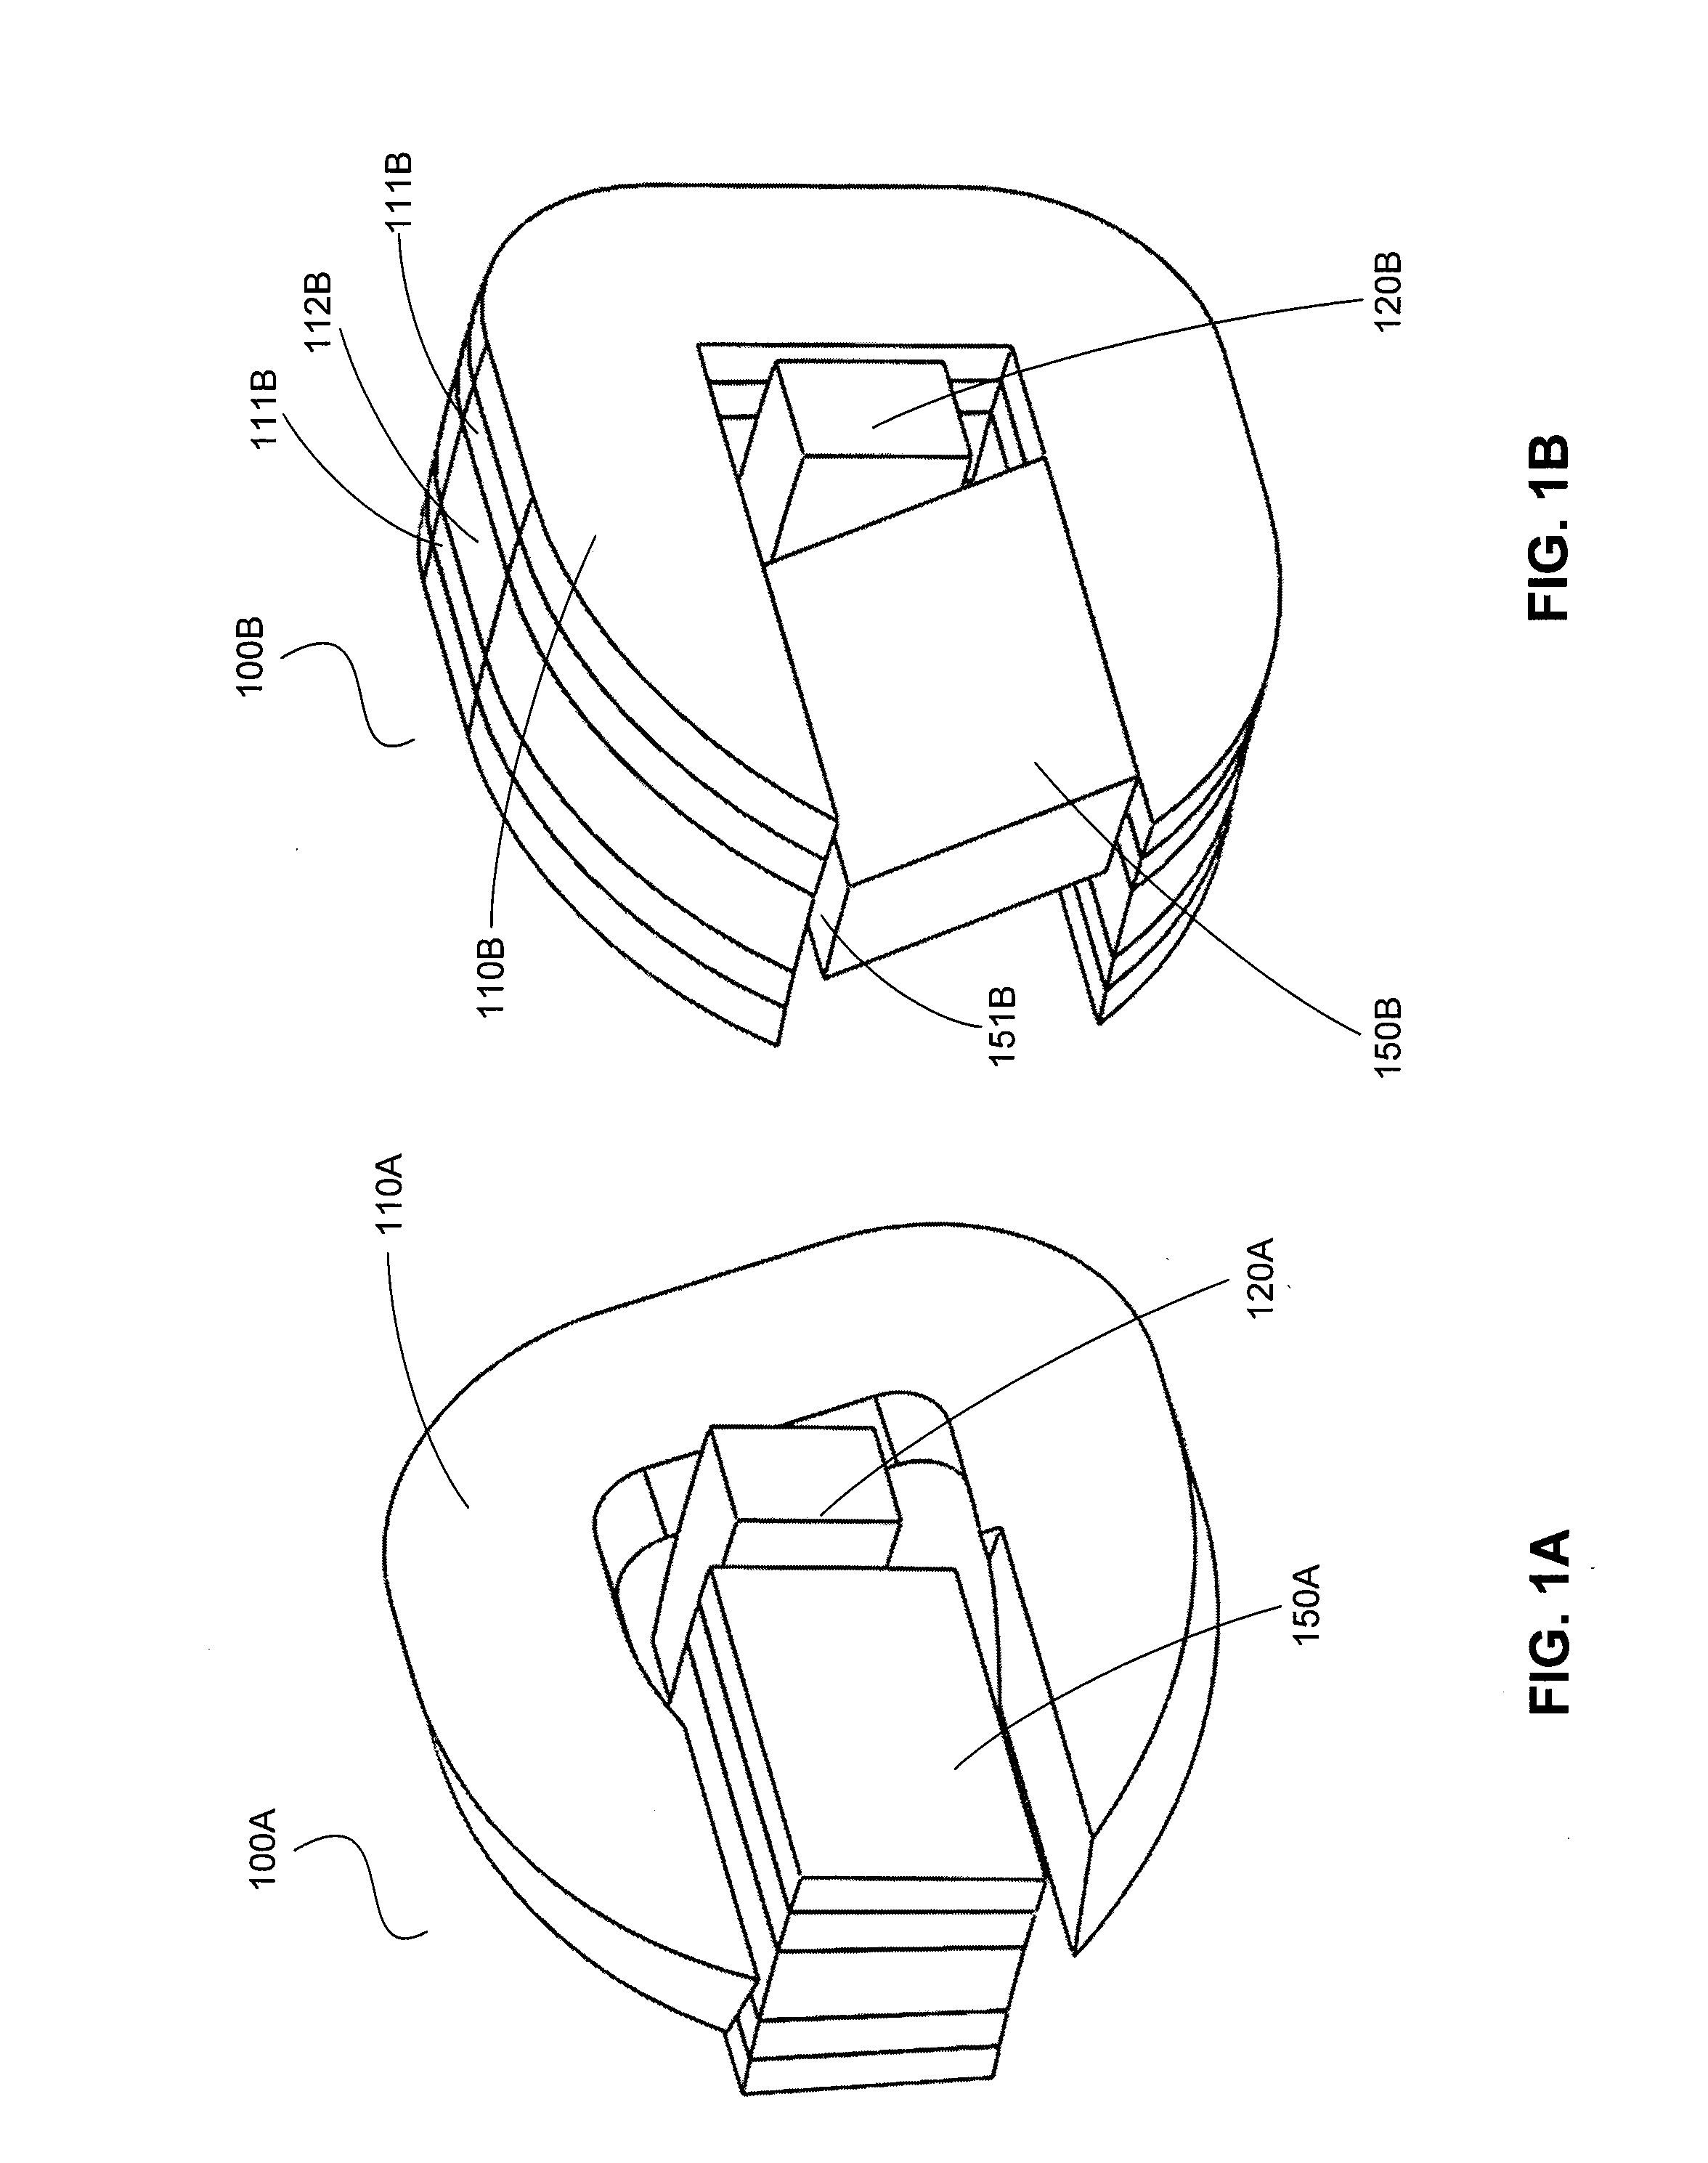 Transverse and/or commutated flux system stator concepts